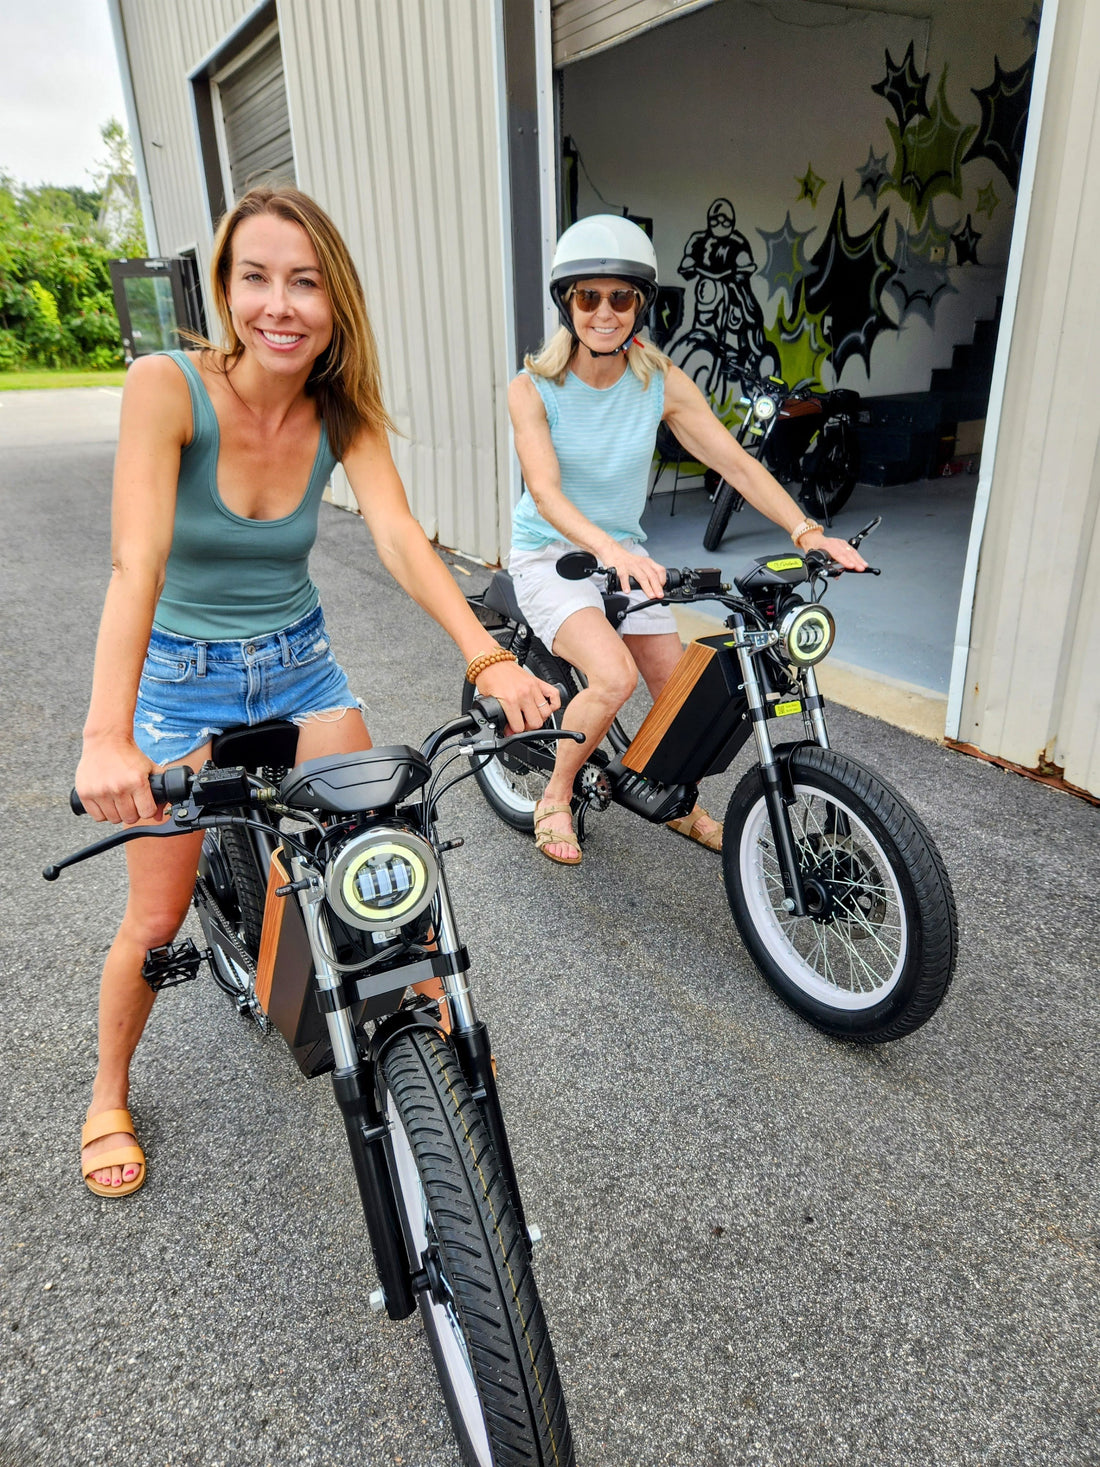 From Fear to Freedom: A Mother-Daughter Journey with Radmoto